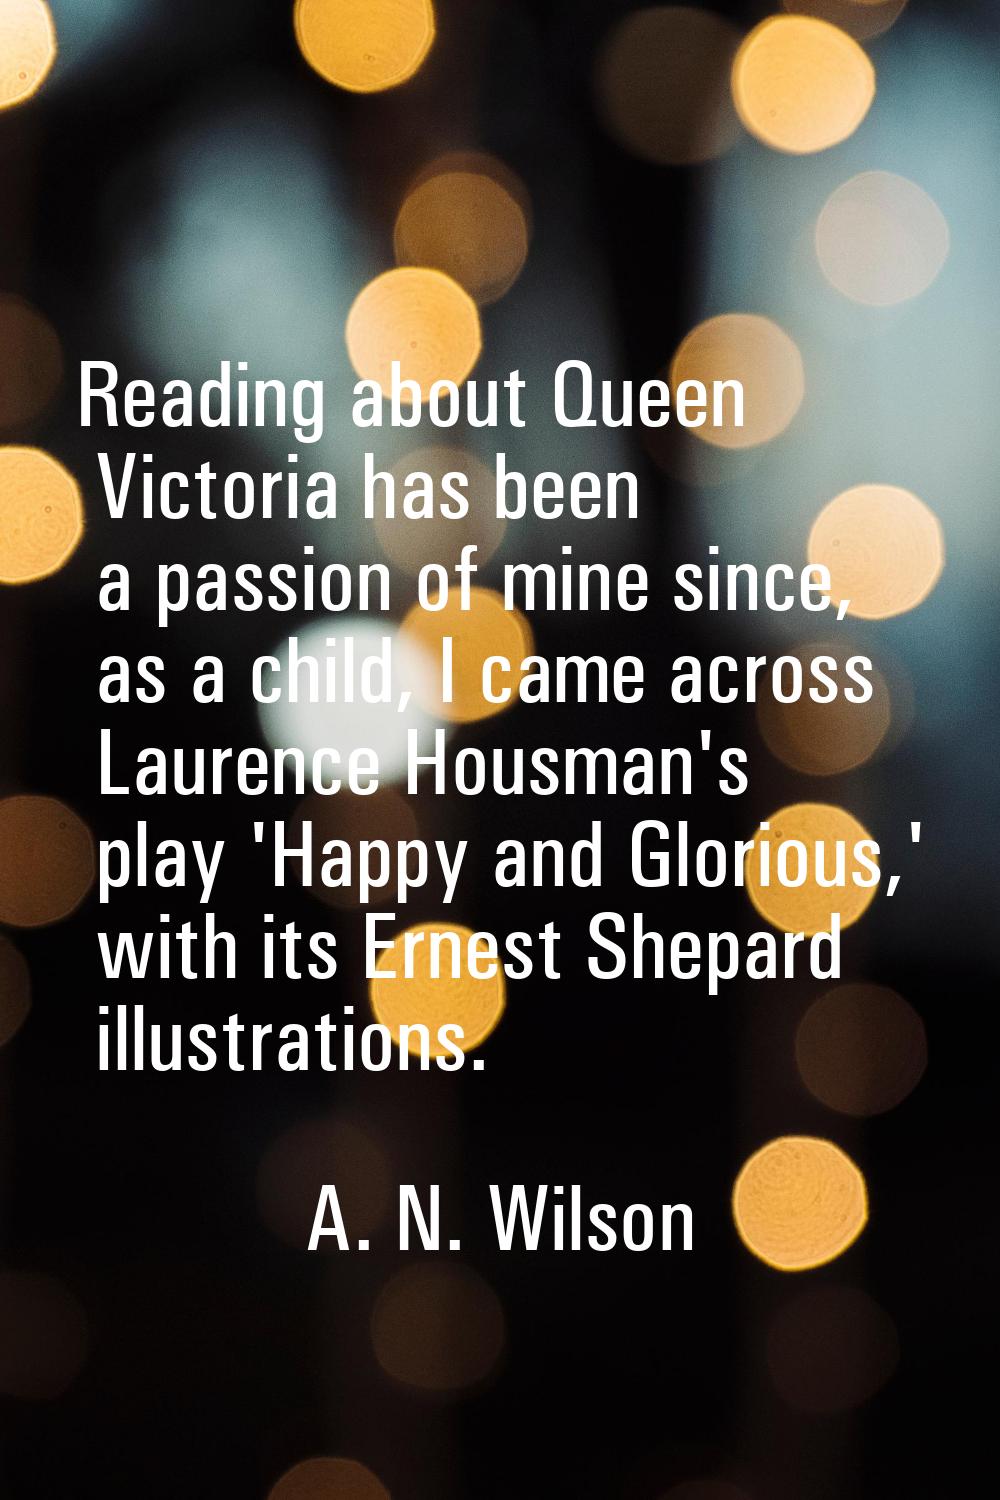 Reading about Queen Victoria has been a passion of mine since, as a child, I came across Laurence H